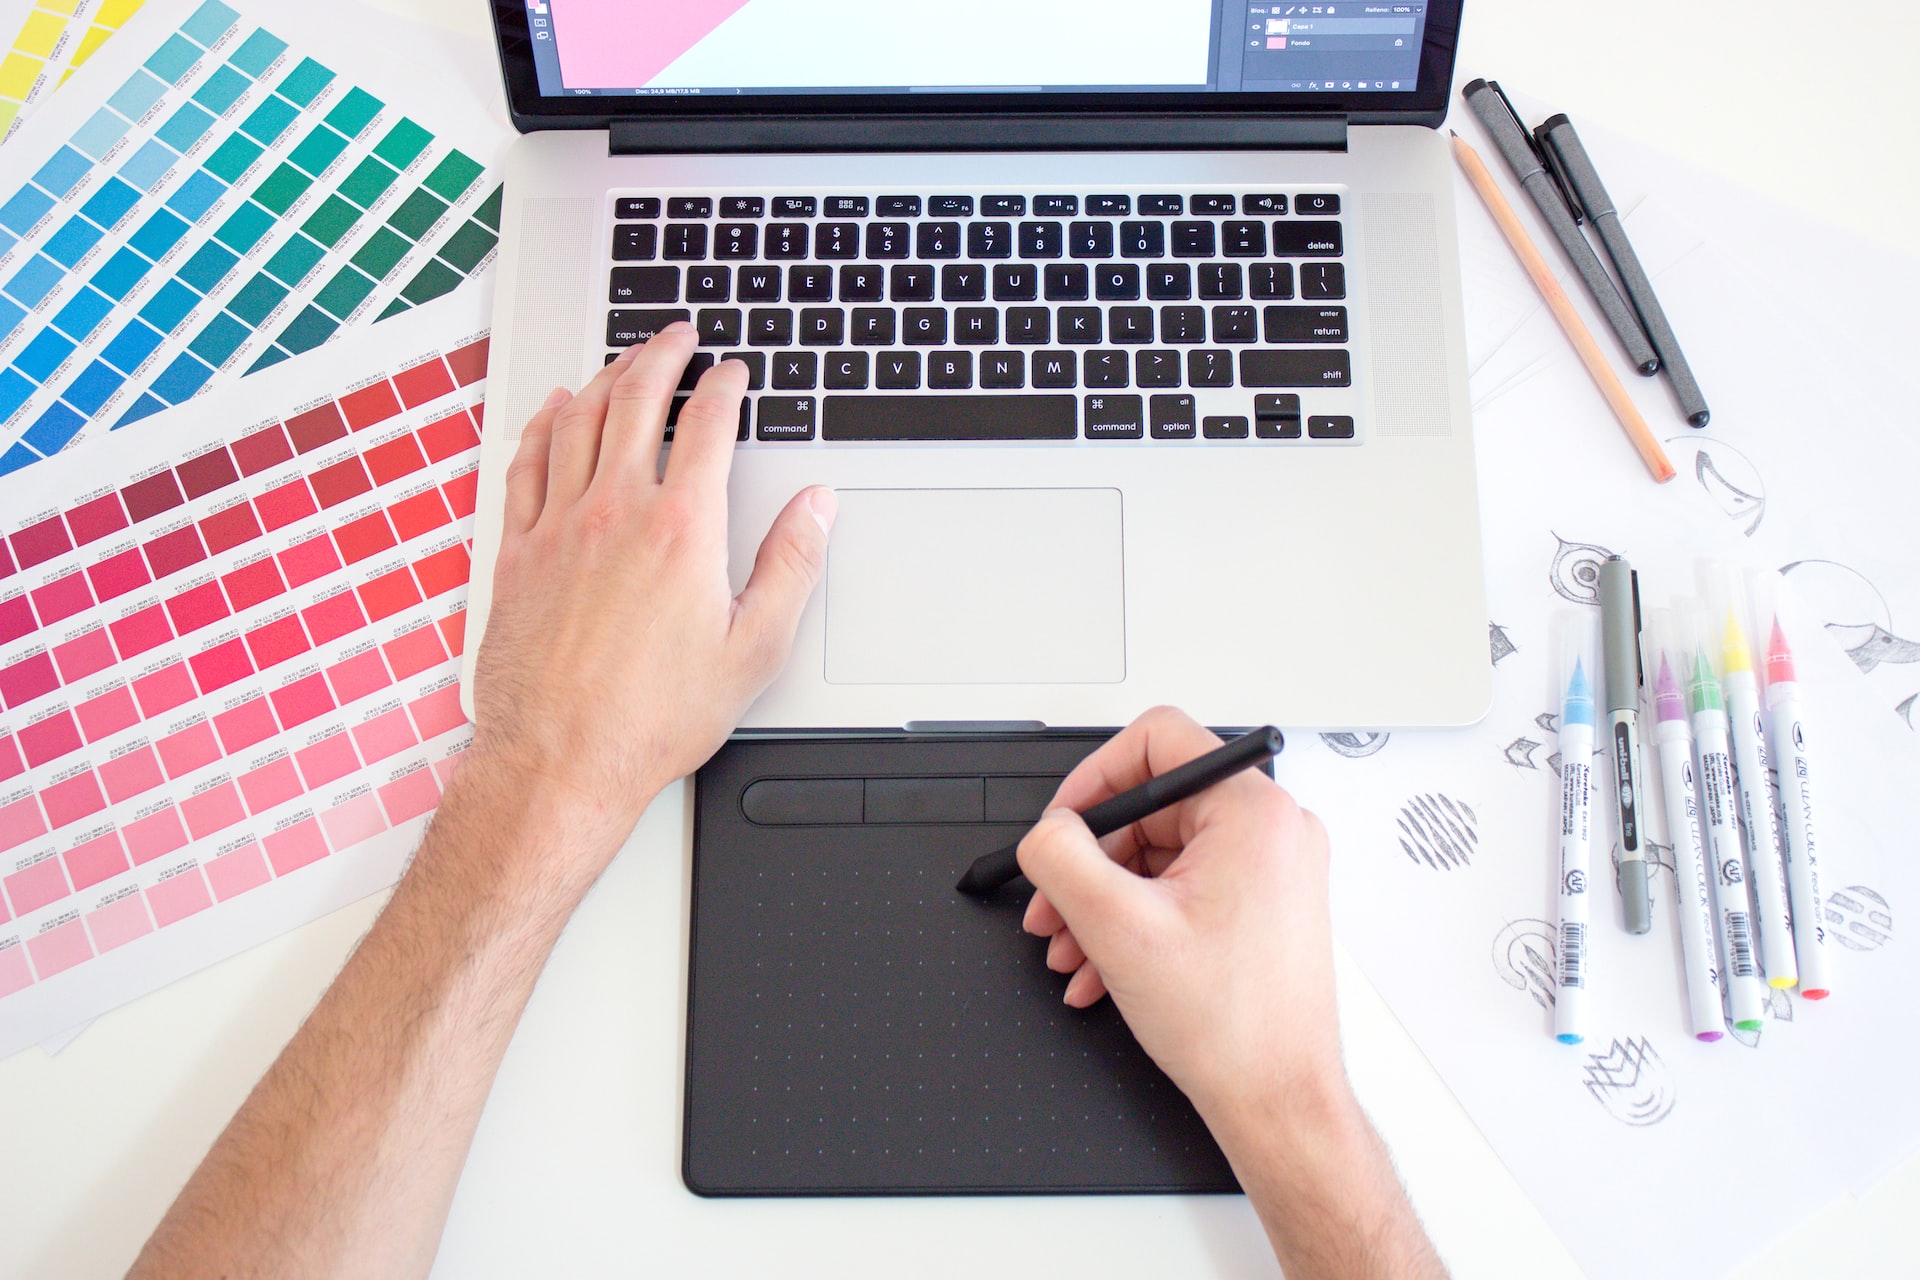 Graphic designer working on a MacBook laptop using a trackpad, colour charts and markers